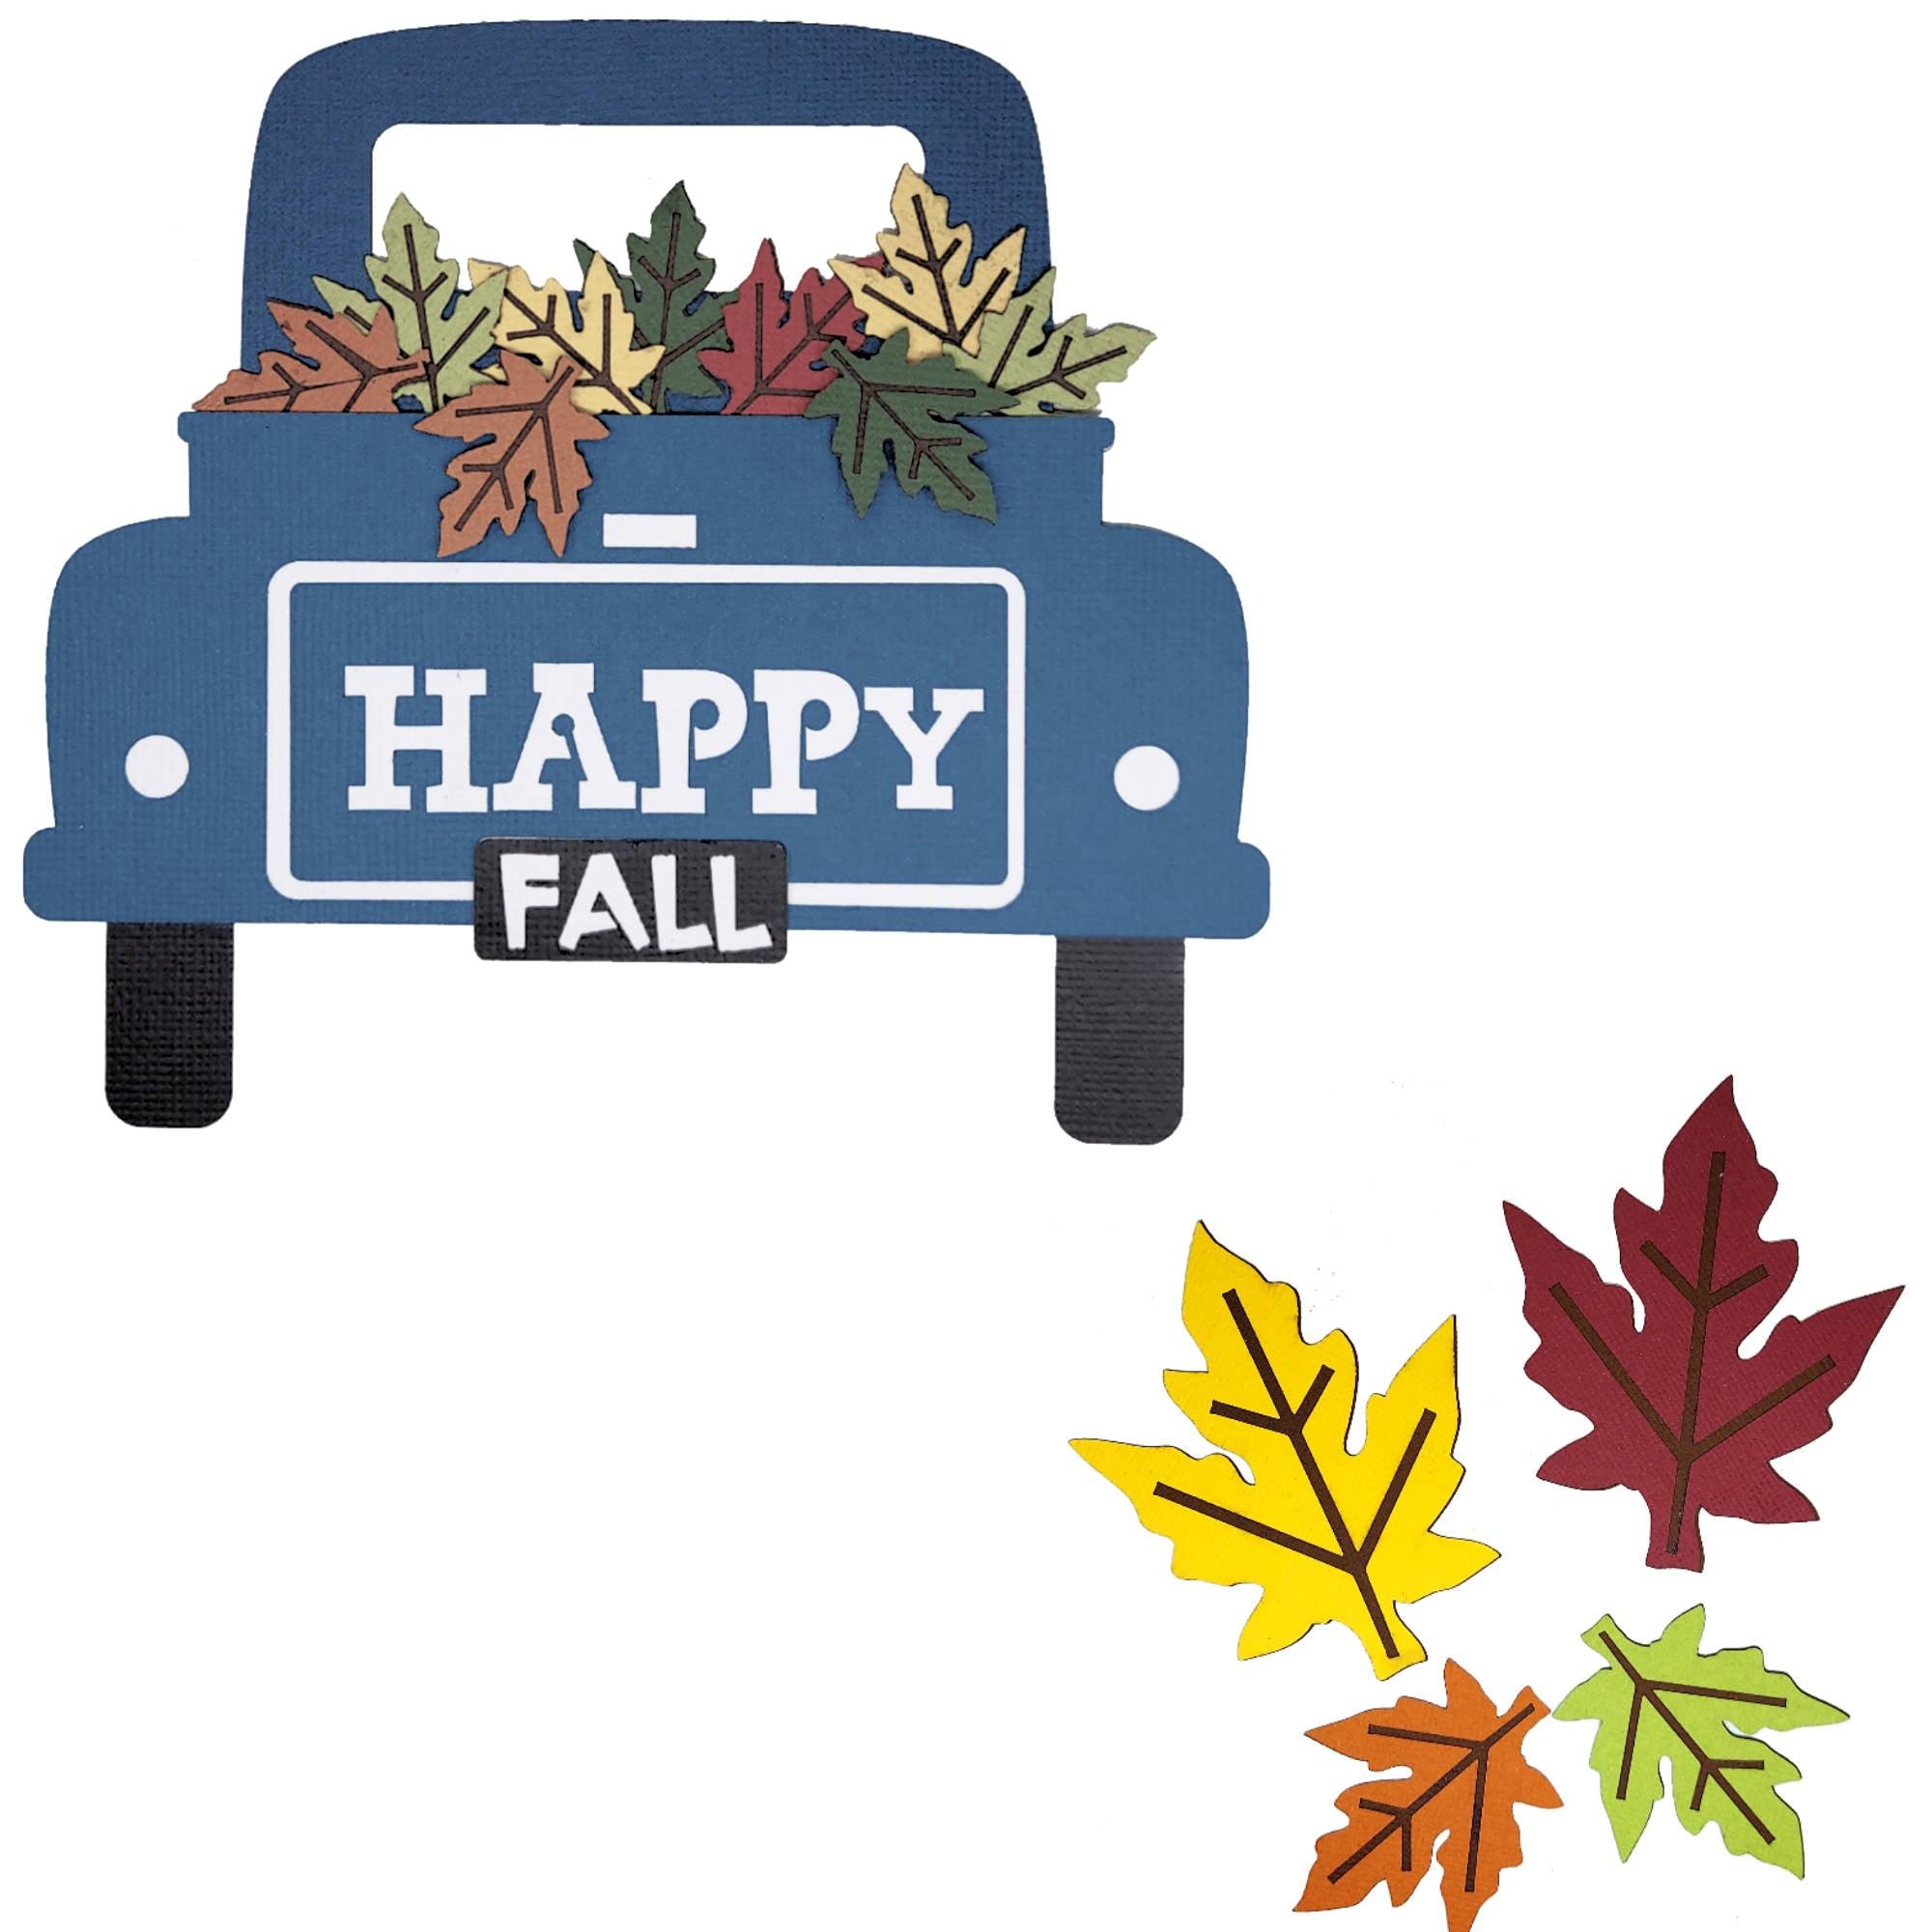 Falling Leaves Collection Happy Fall Blue Truck & Leaves 5 x 5 Laser Cut Scrapbook Embellishment by SSC Laser Designs